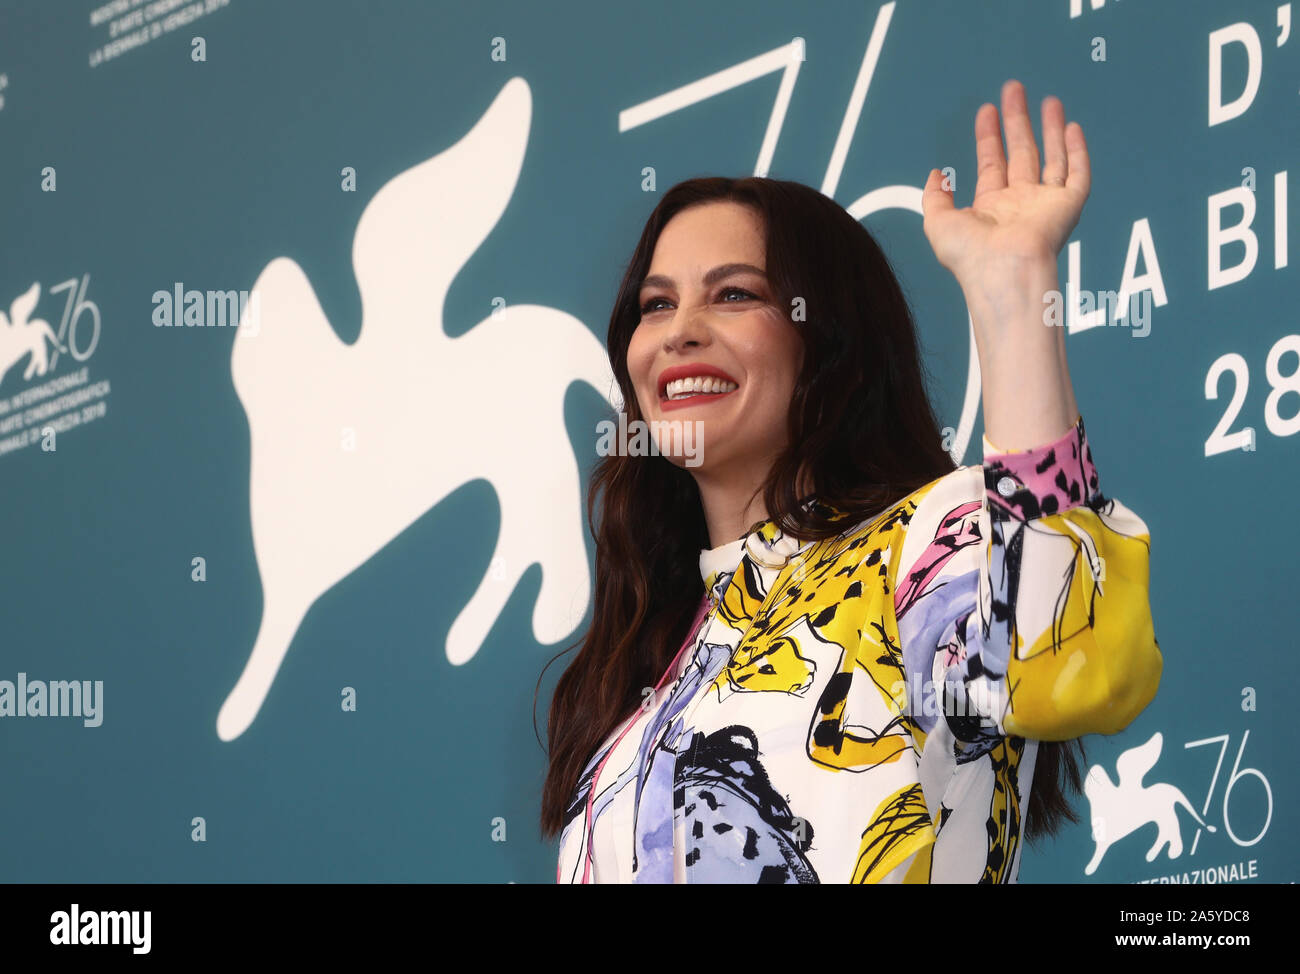 VENICE, ITALY - AUGUST 29,2019: Liv Tyler attends 'Ad Astra' photocall during the 76th Venice Film Festival on August 29, 2019 in Venice, Italy Stock Photo